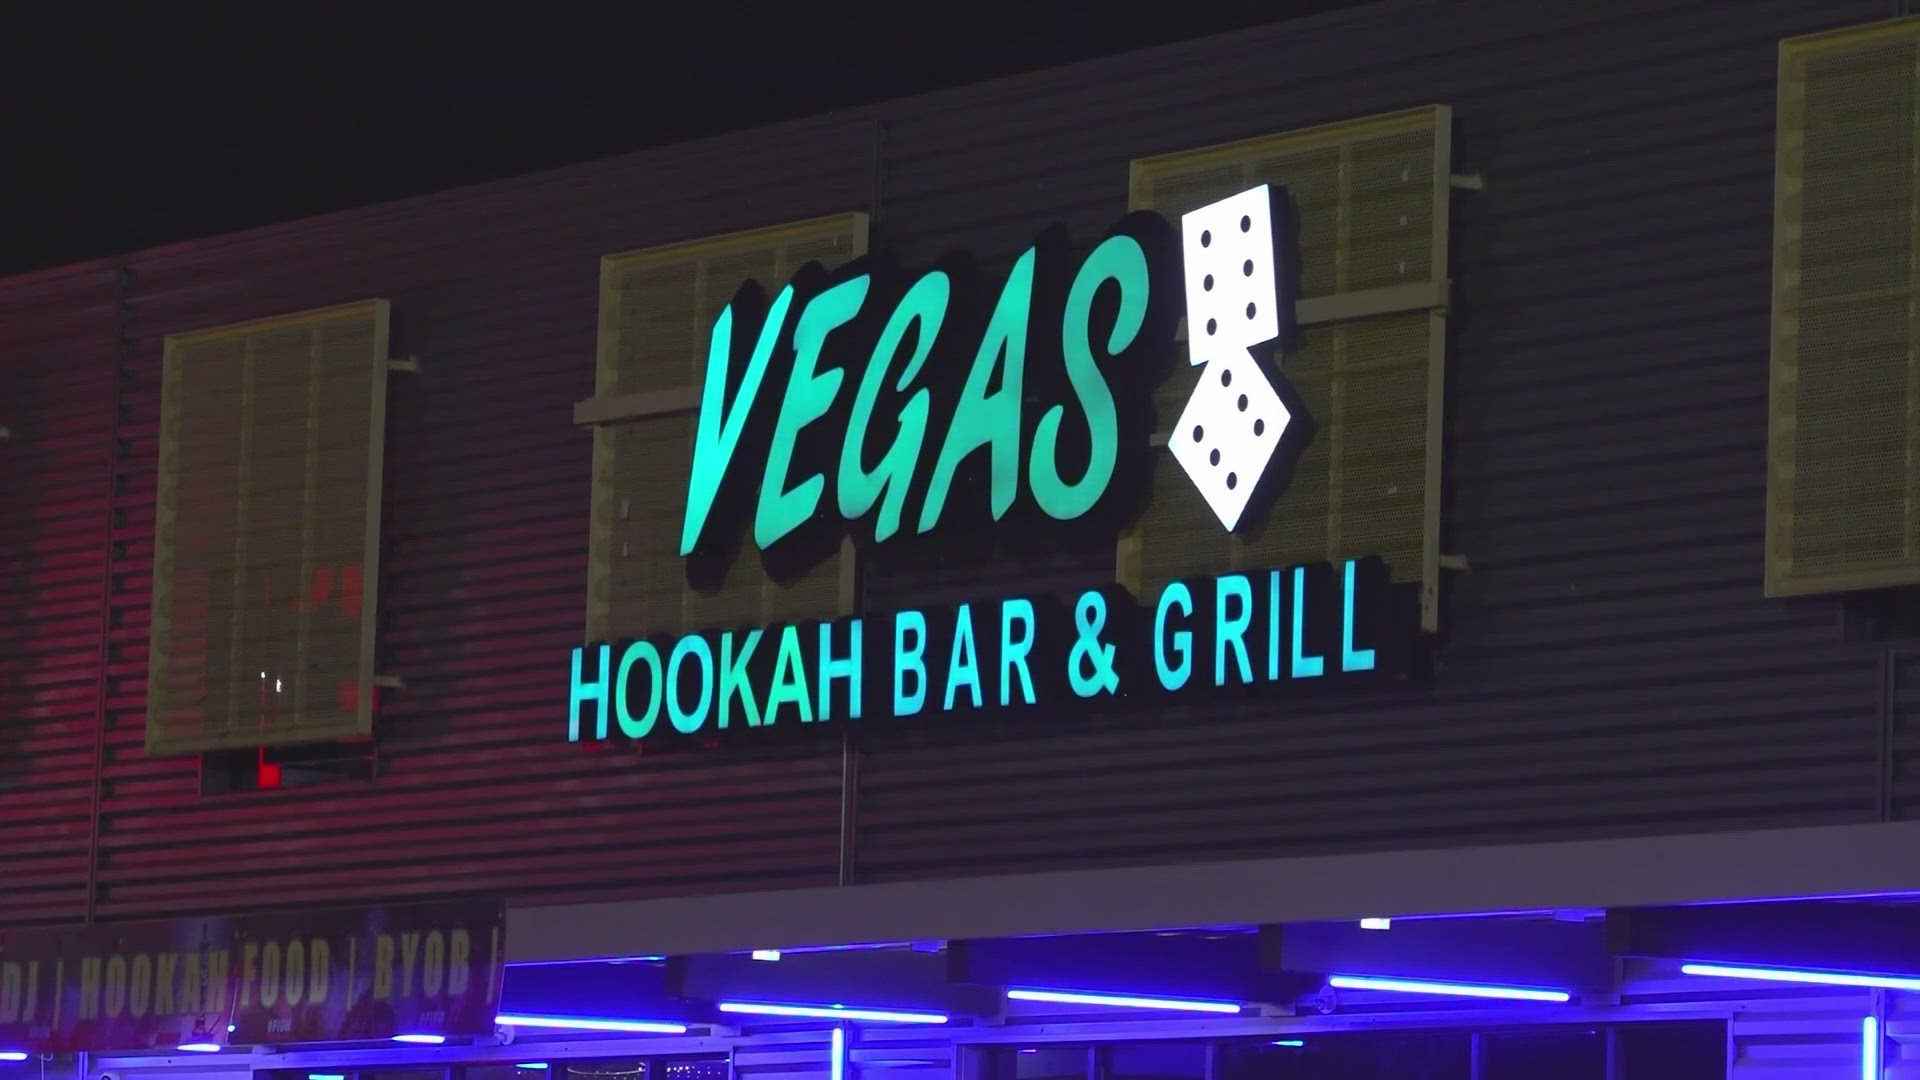 The incident started when two groups of men were kicked out of a hookah bar for fighting, police say.